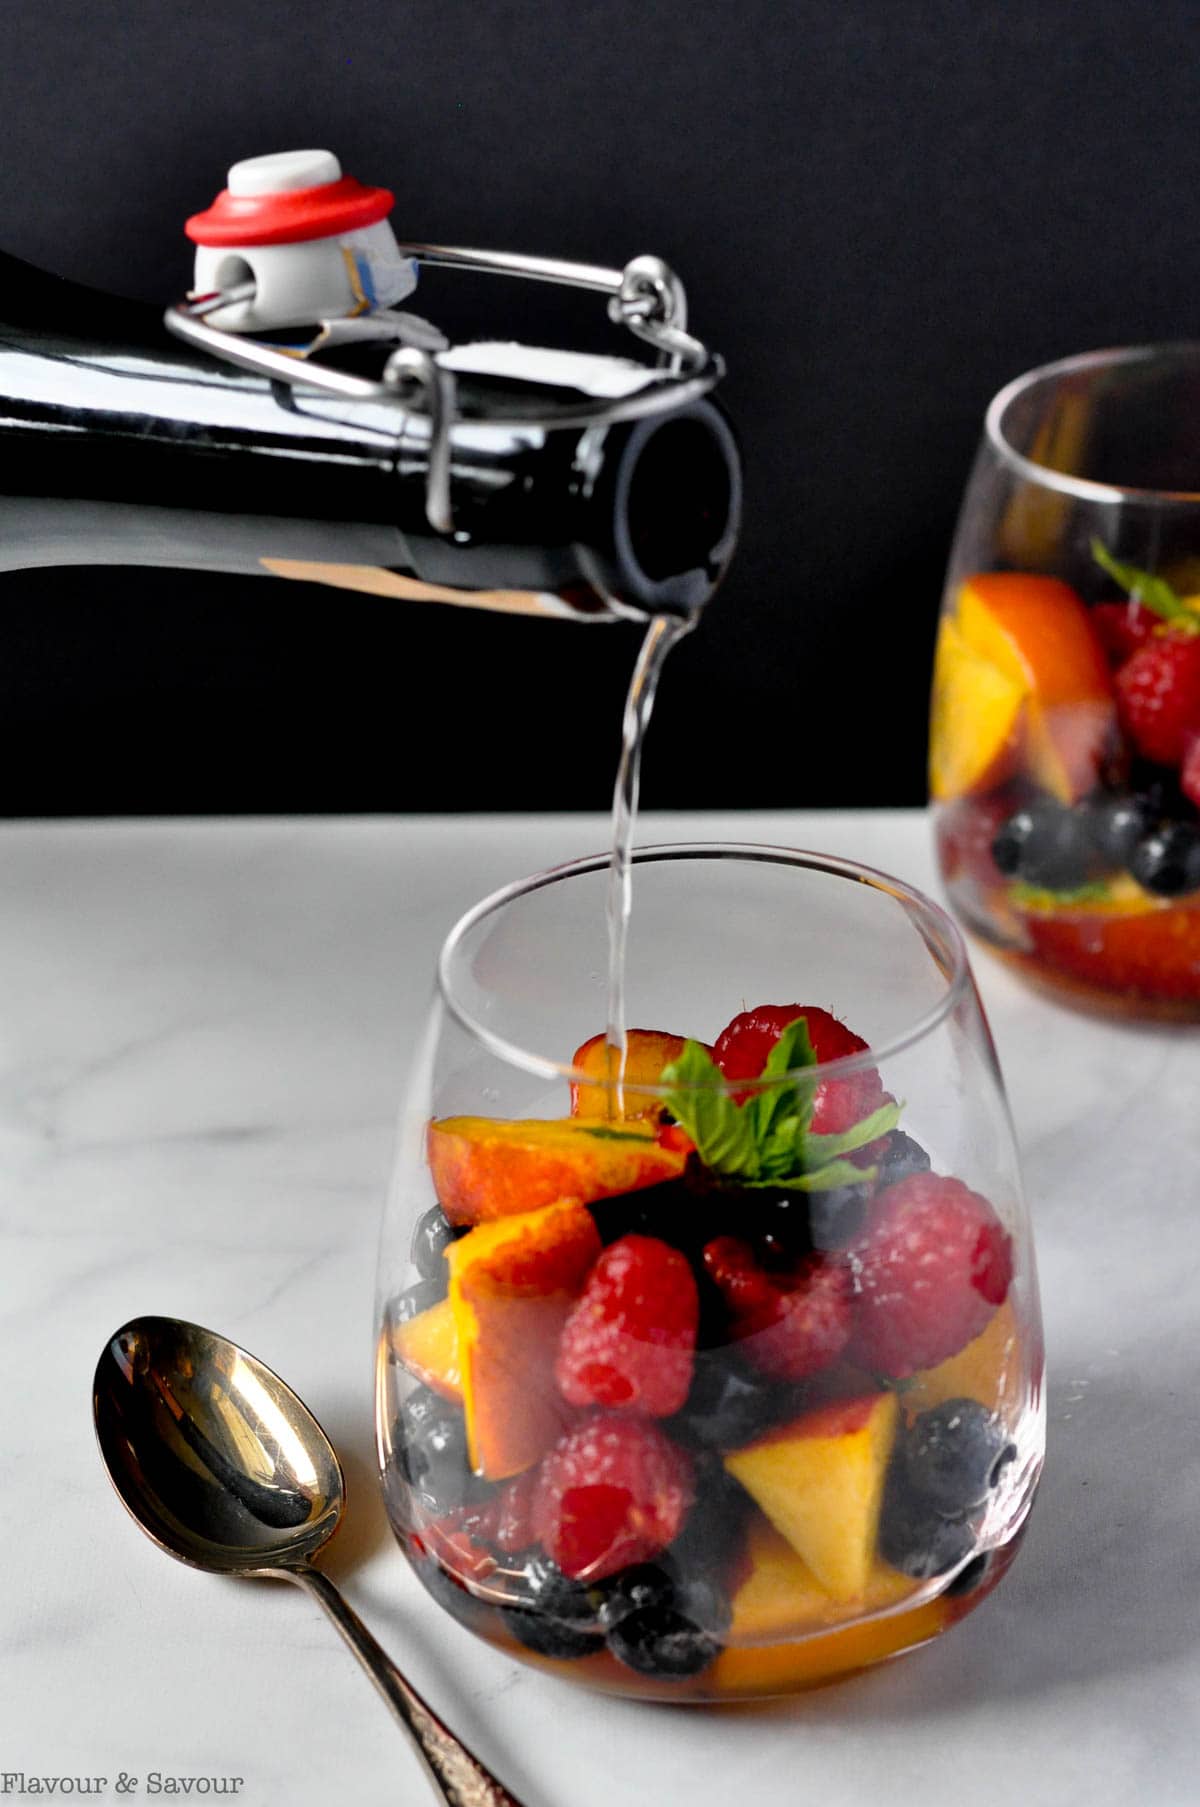 Pouring Prosecco into a glass of nectarines and berries.